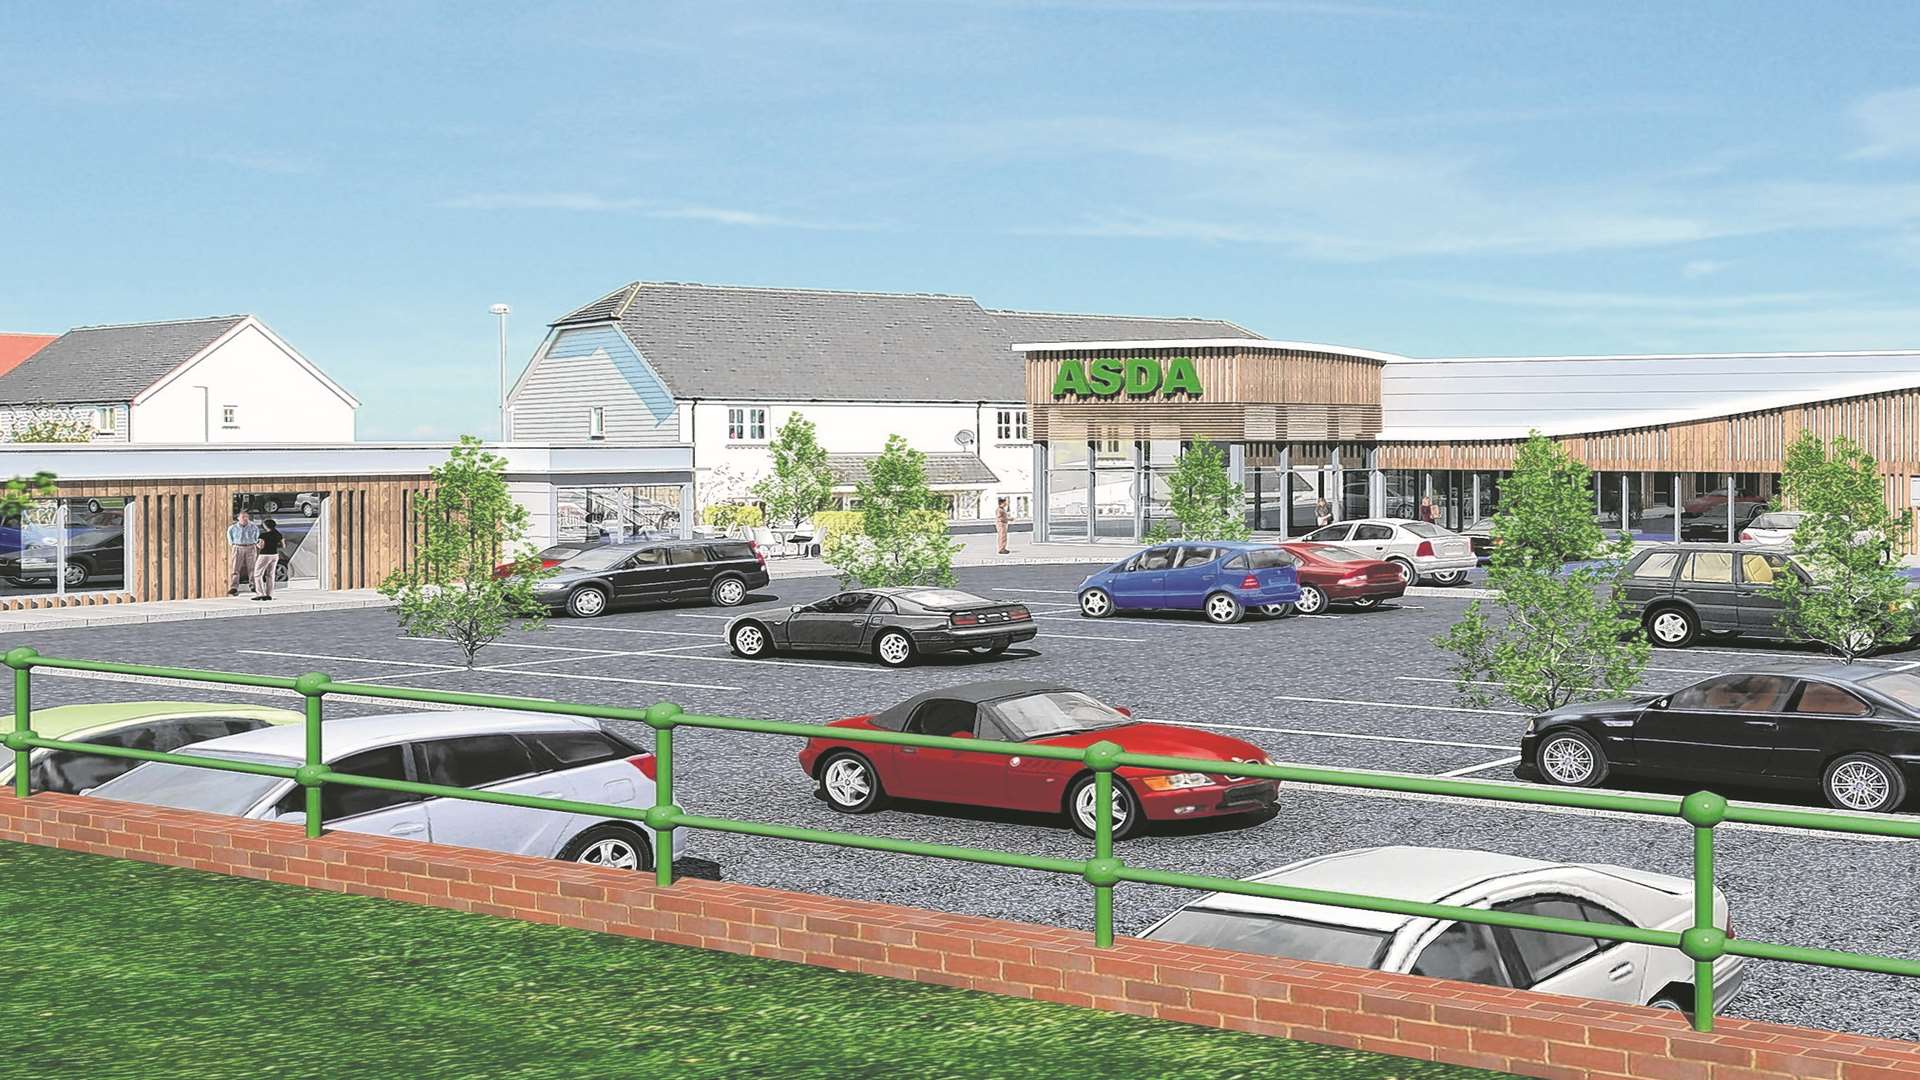 Artist's impression of how Asda's Minster store could look